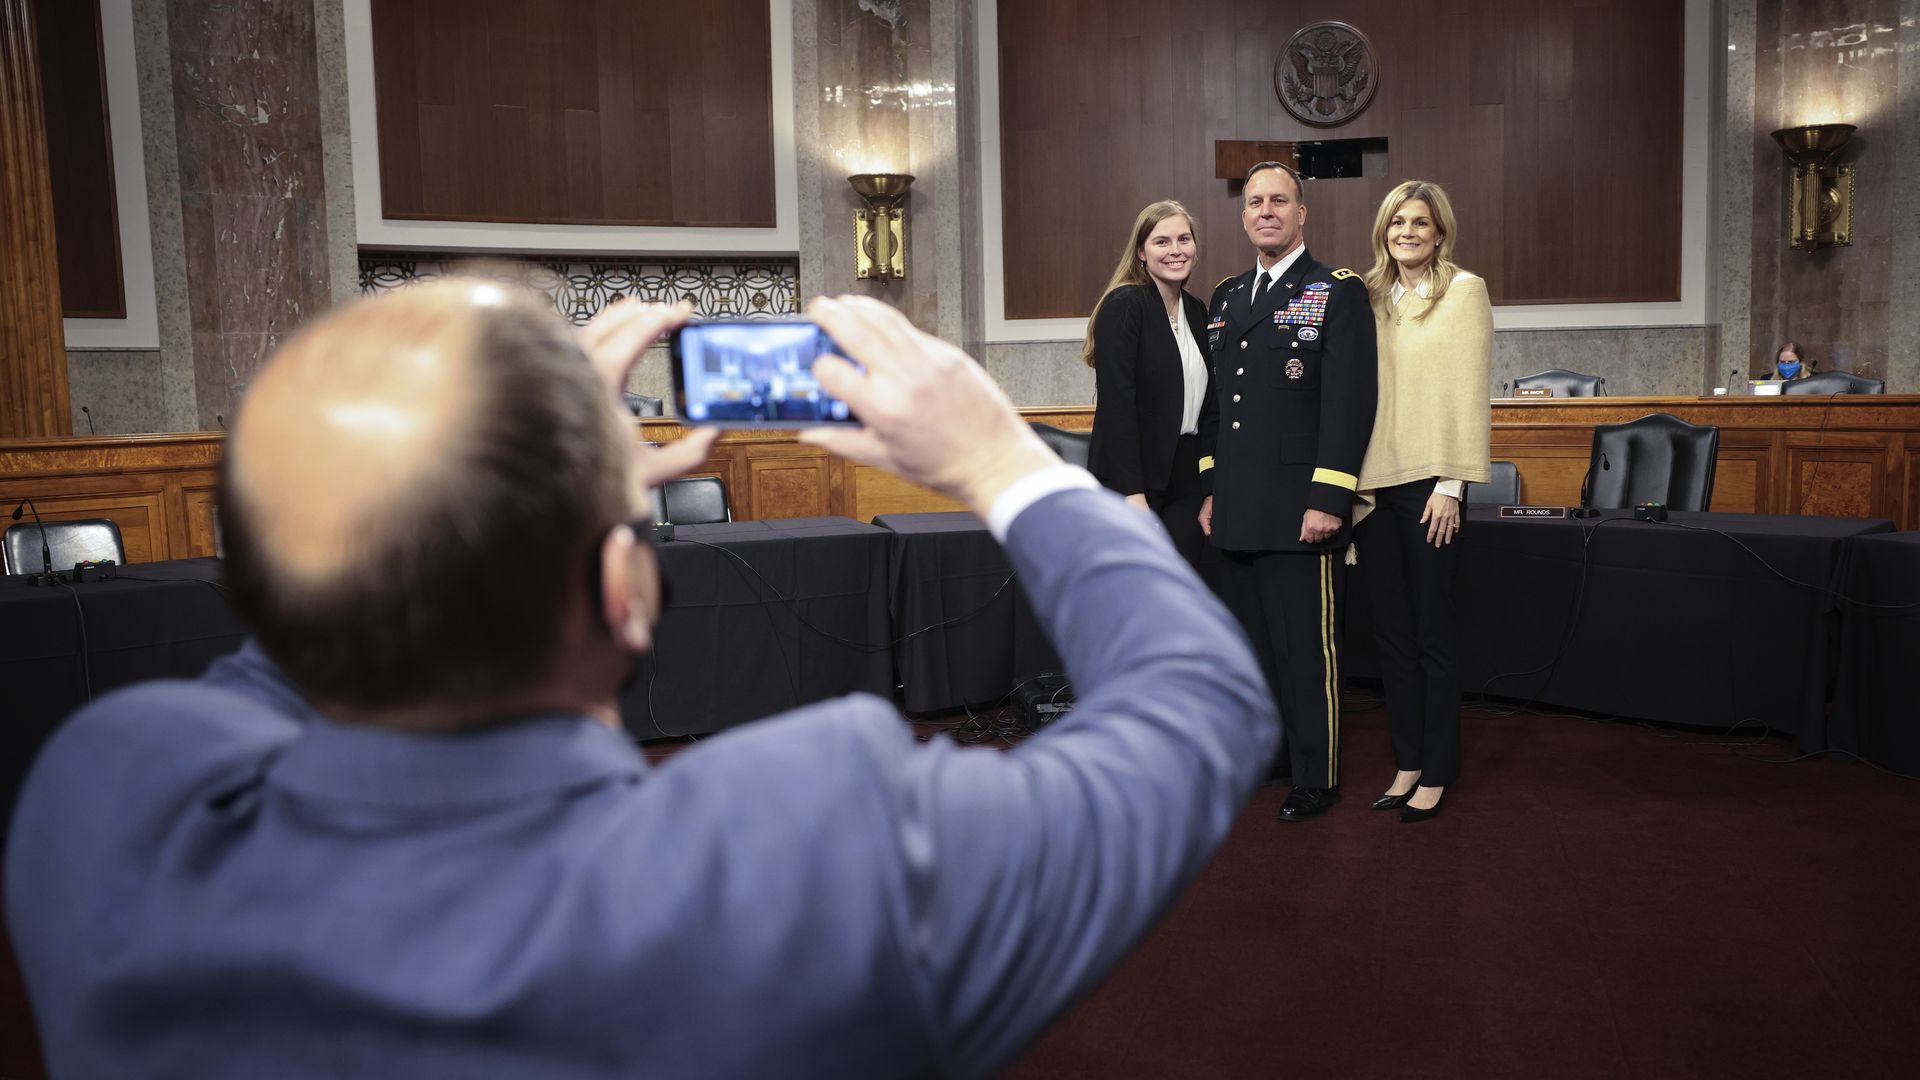 A general nominated to lead U.S. Central Command poses with his family before his confirmation hearing.